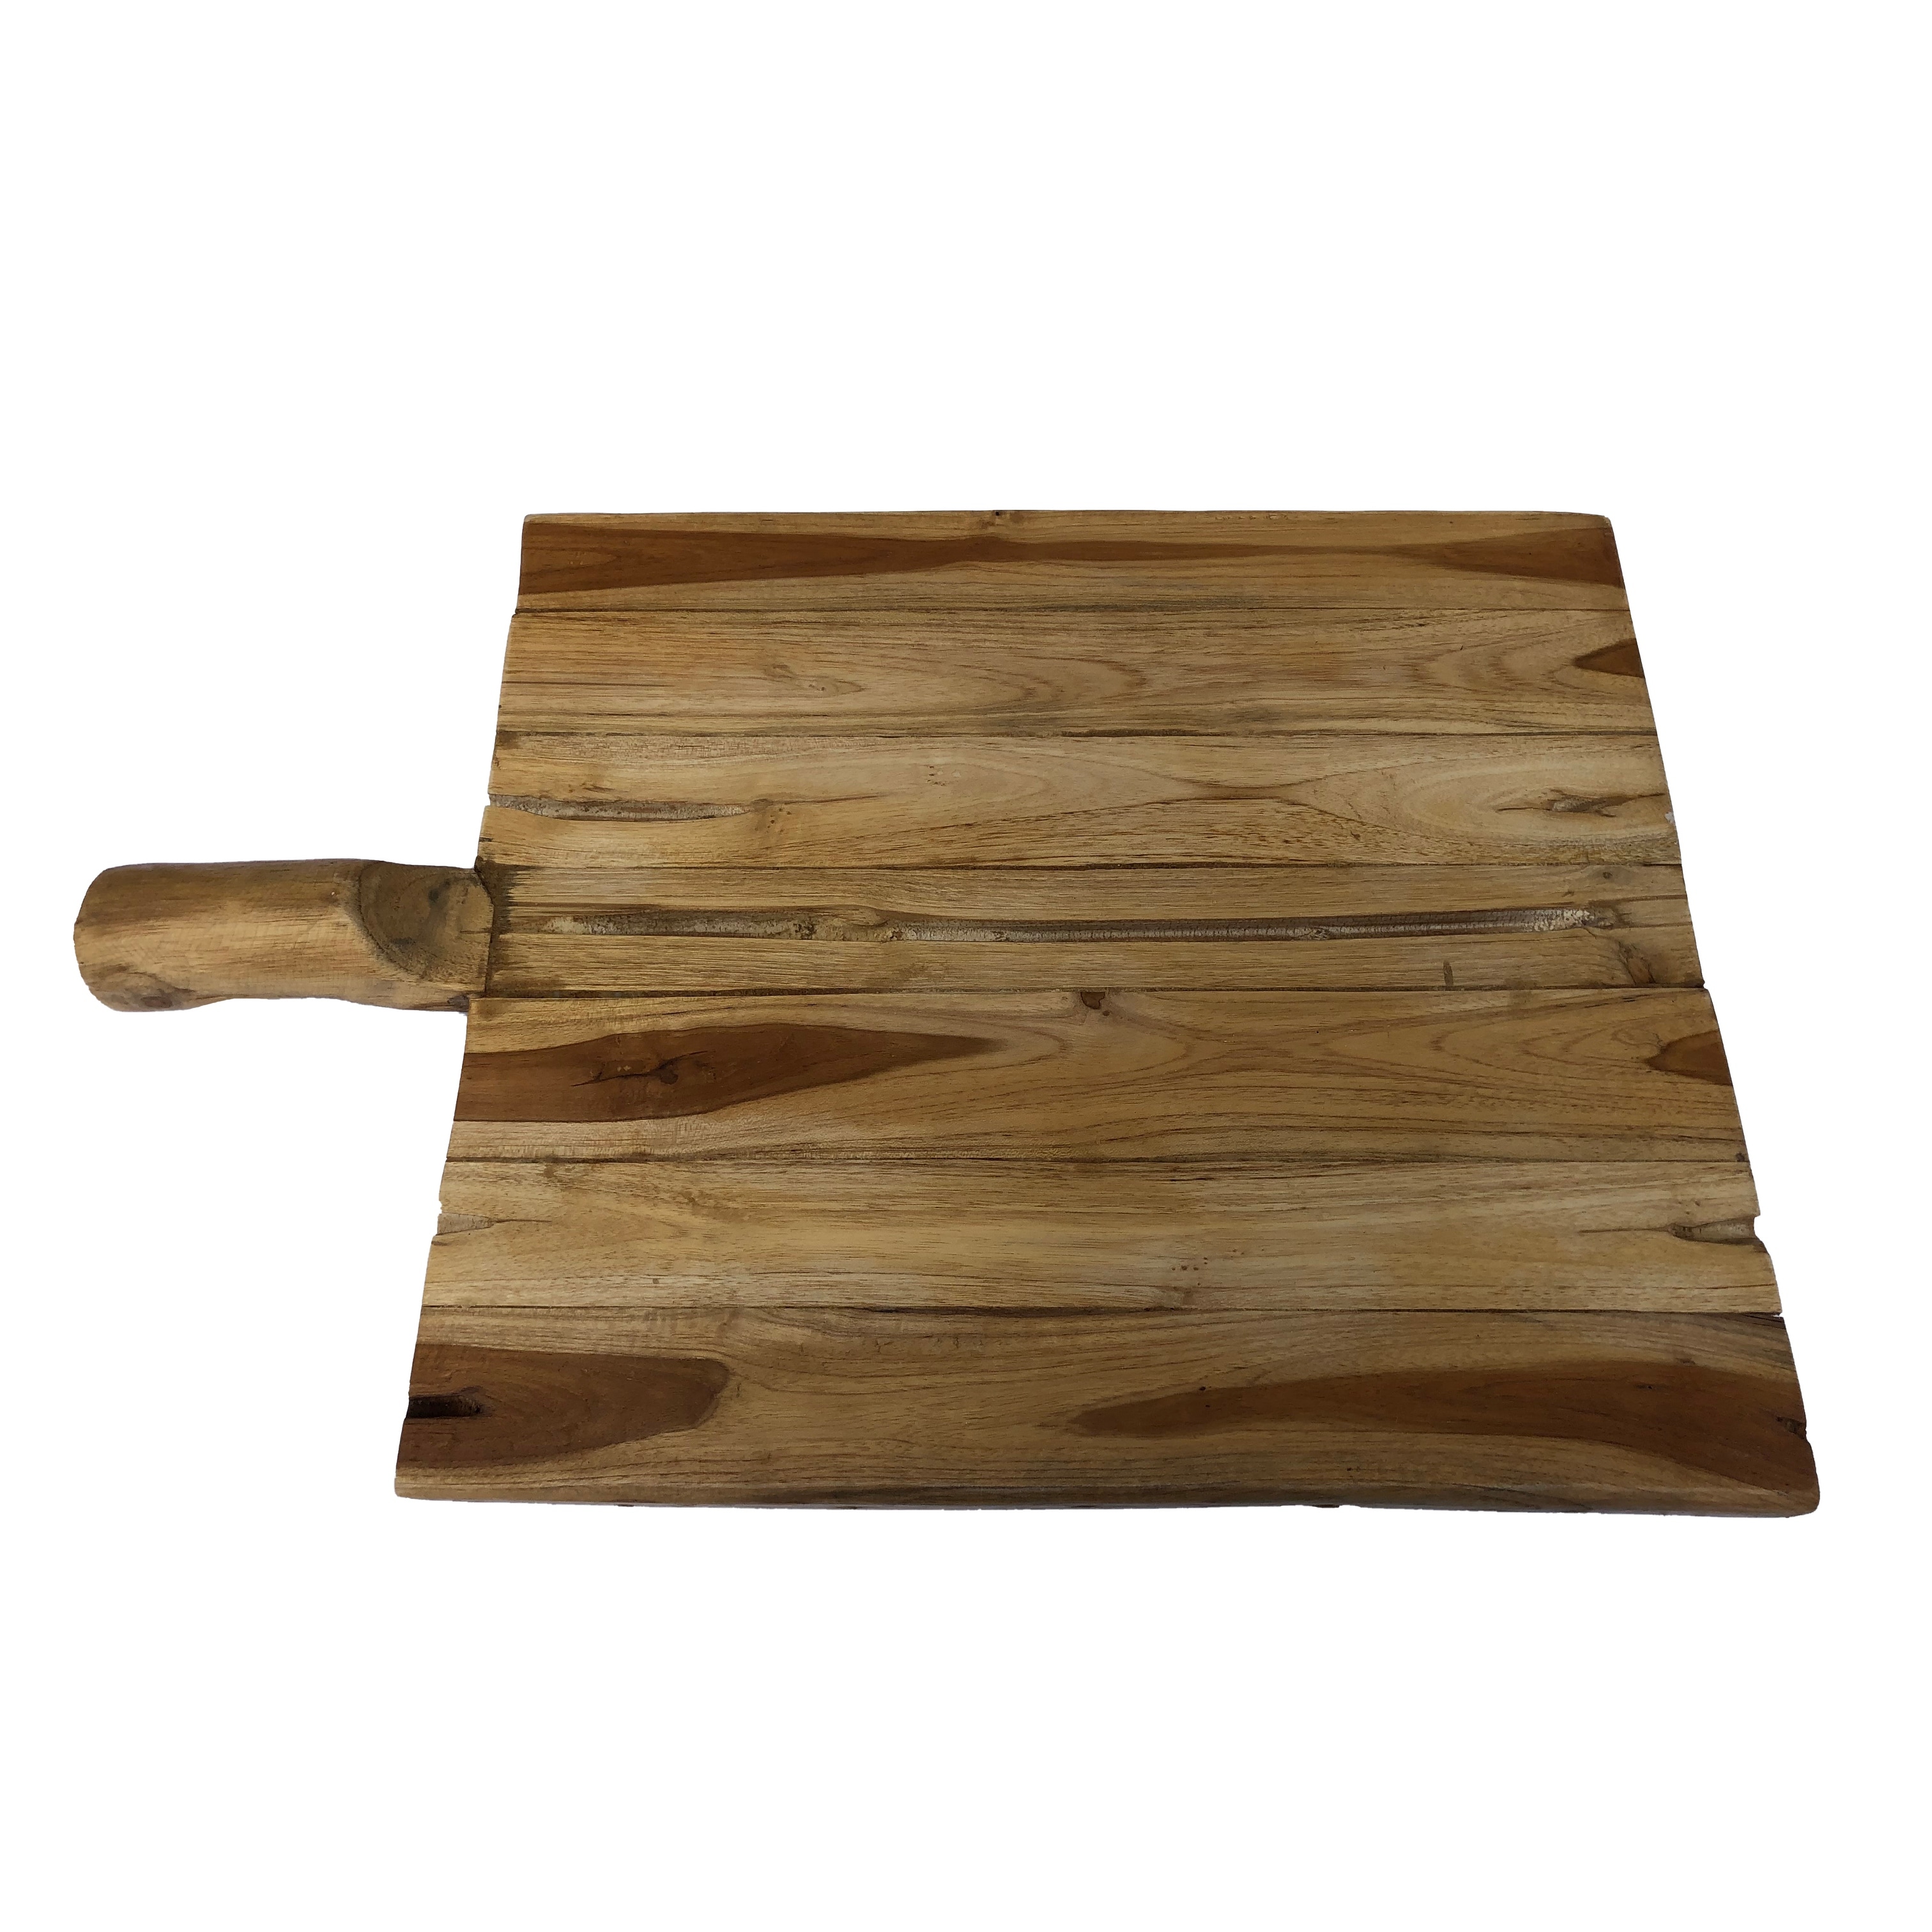 https://ak1.ostkcdn.com/images/products/is/images/direct/f3b7f043309aa2e6aabb2423e5461d2b4d06b30c/Branch-Teak-Double-Cutting-Board.jpg